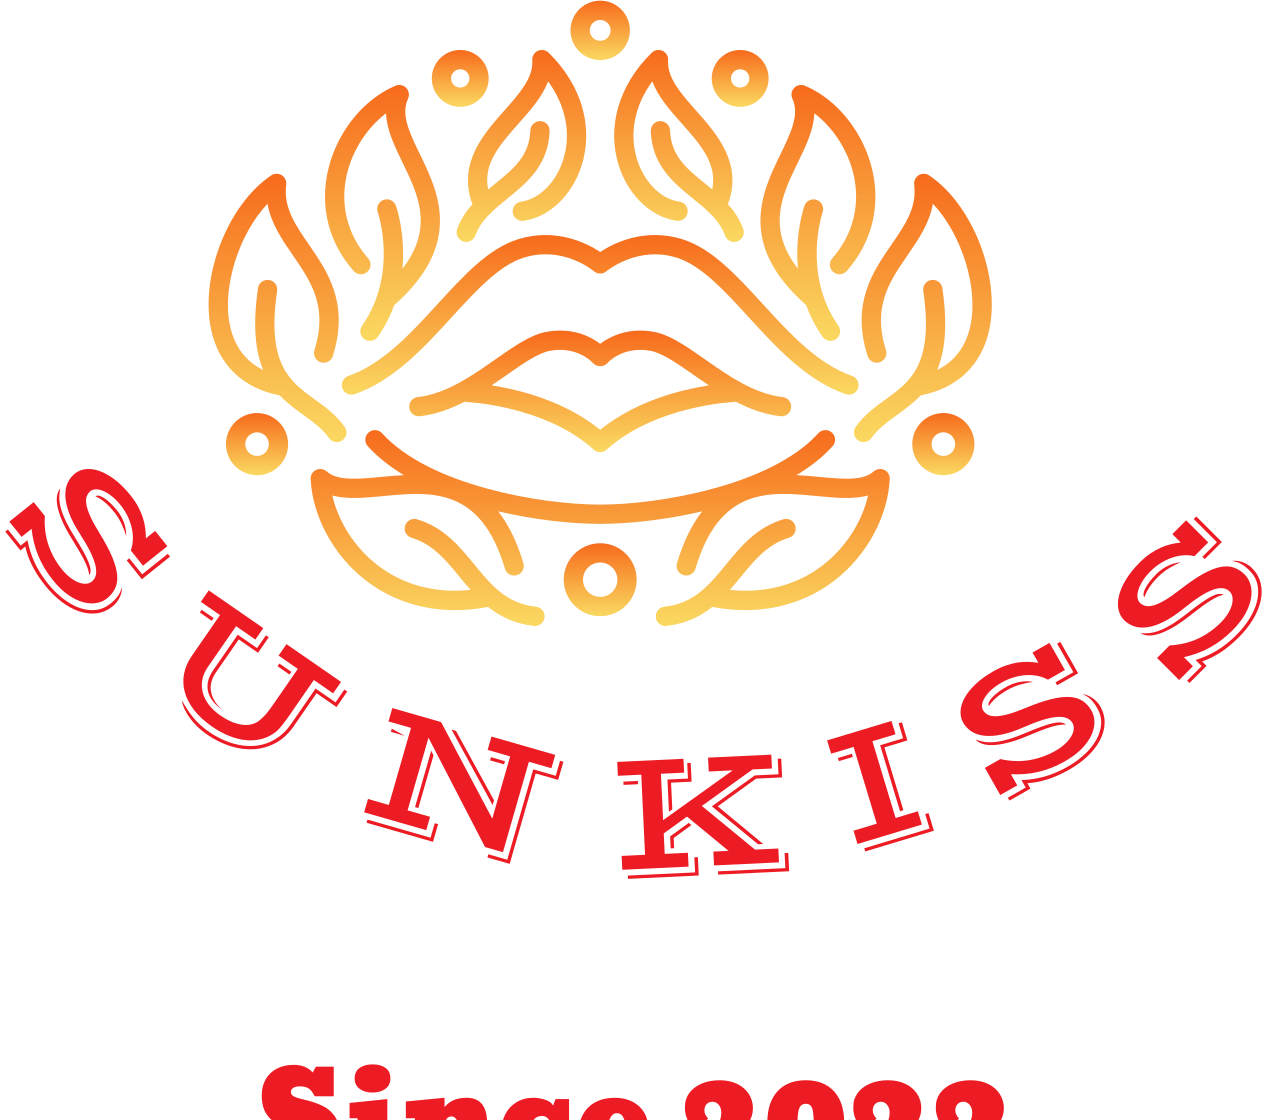 SUNKISS 's web page